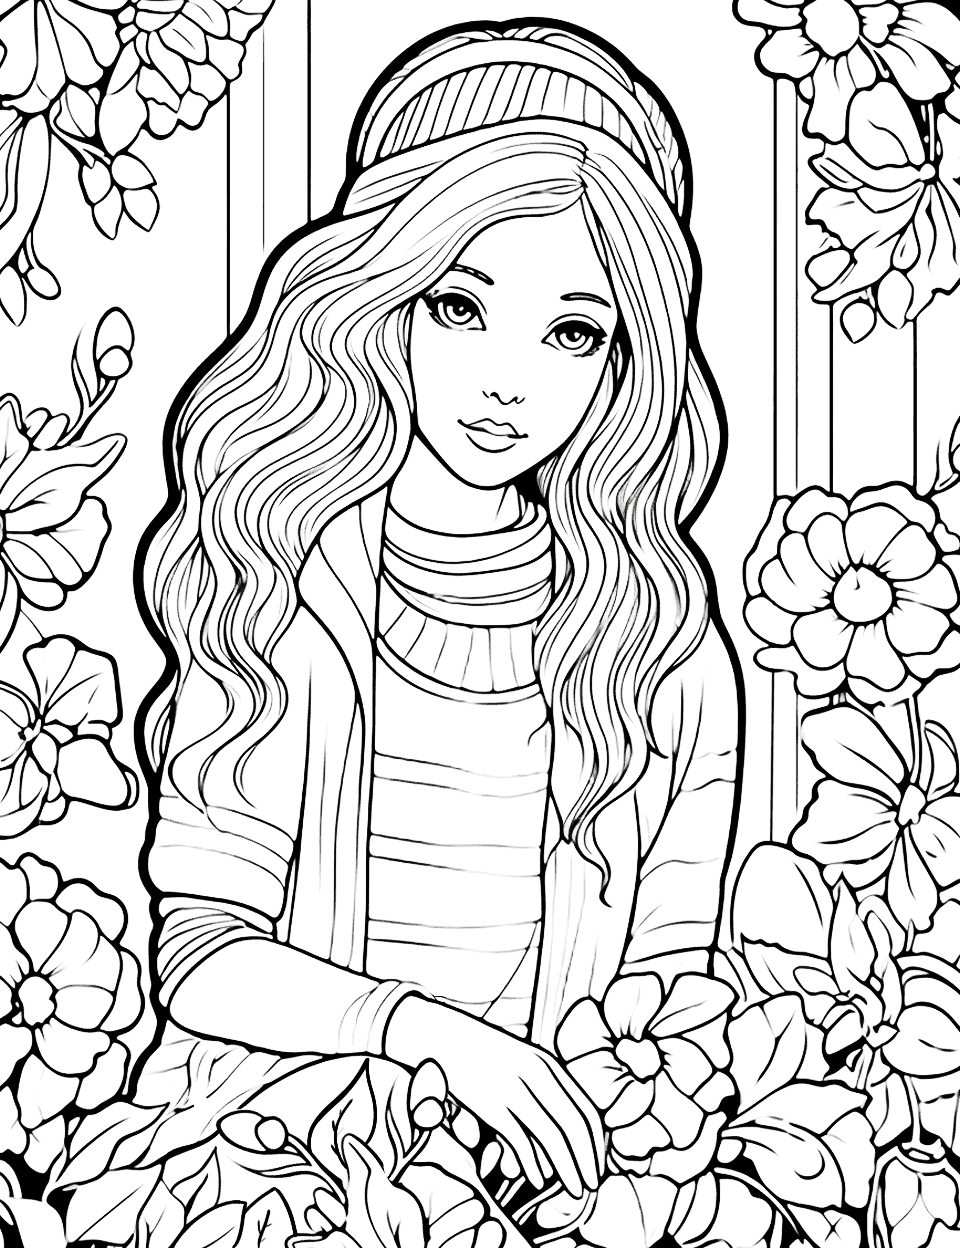 Fashion Girl in the Garden Adult Coloring Page - A stylish girl in a trendy outfit sitting in a beautiful garden filled with flowers and plants.